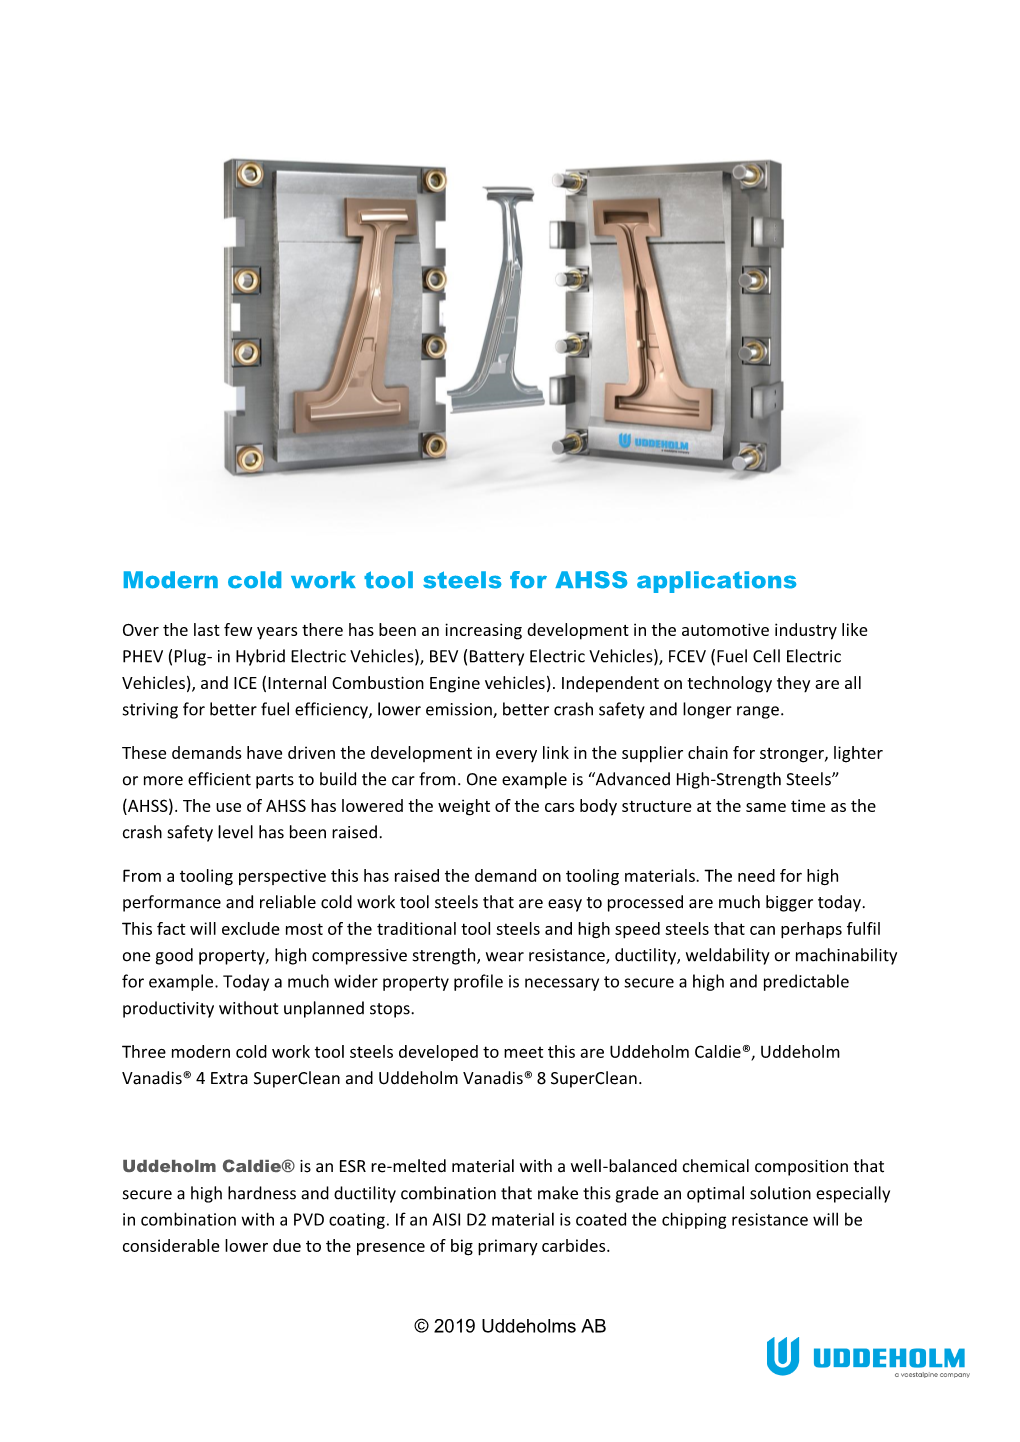 Modern Cold Work Tool Steels for AHSS Applications